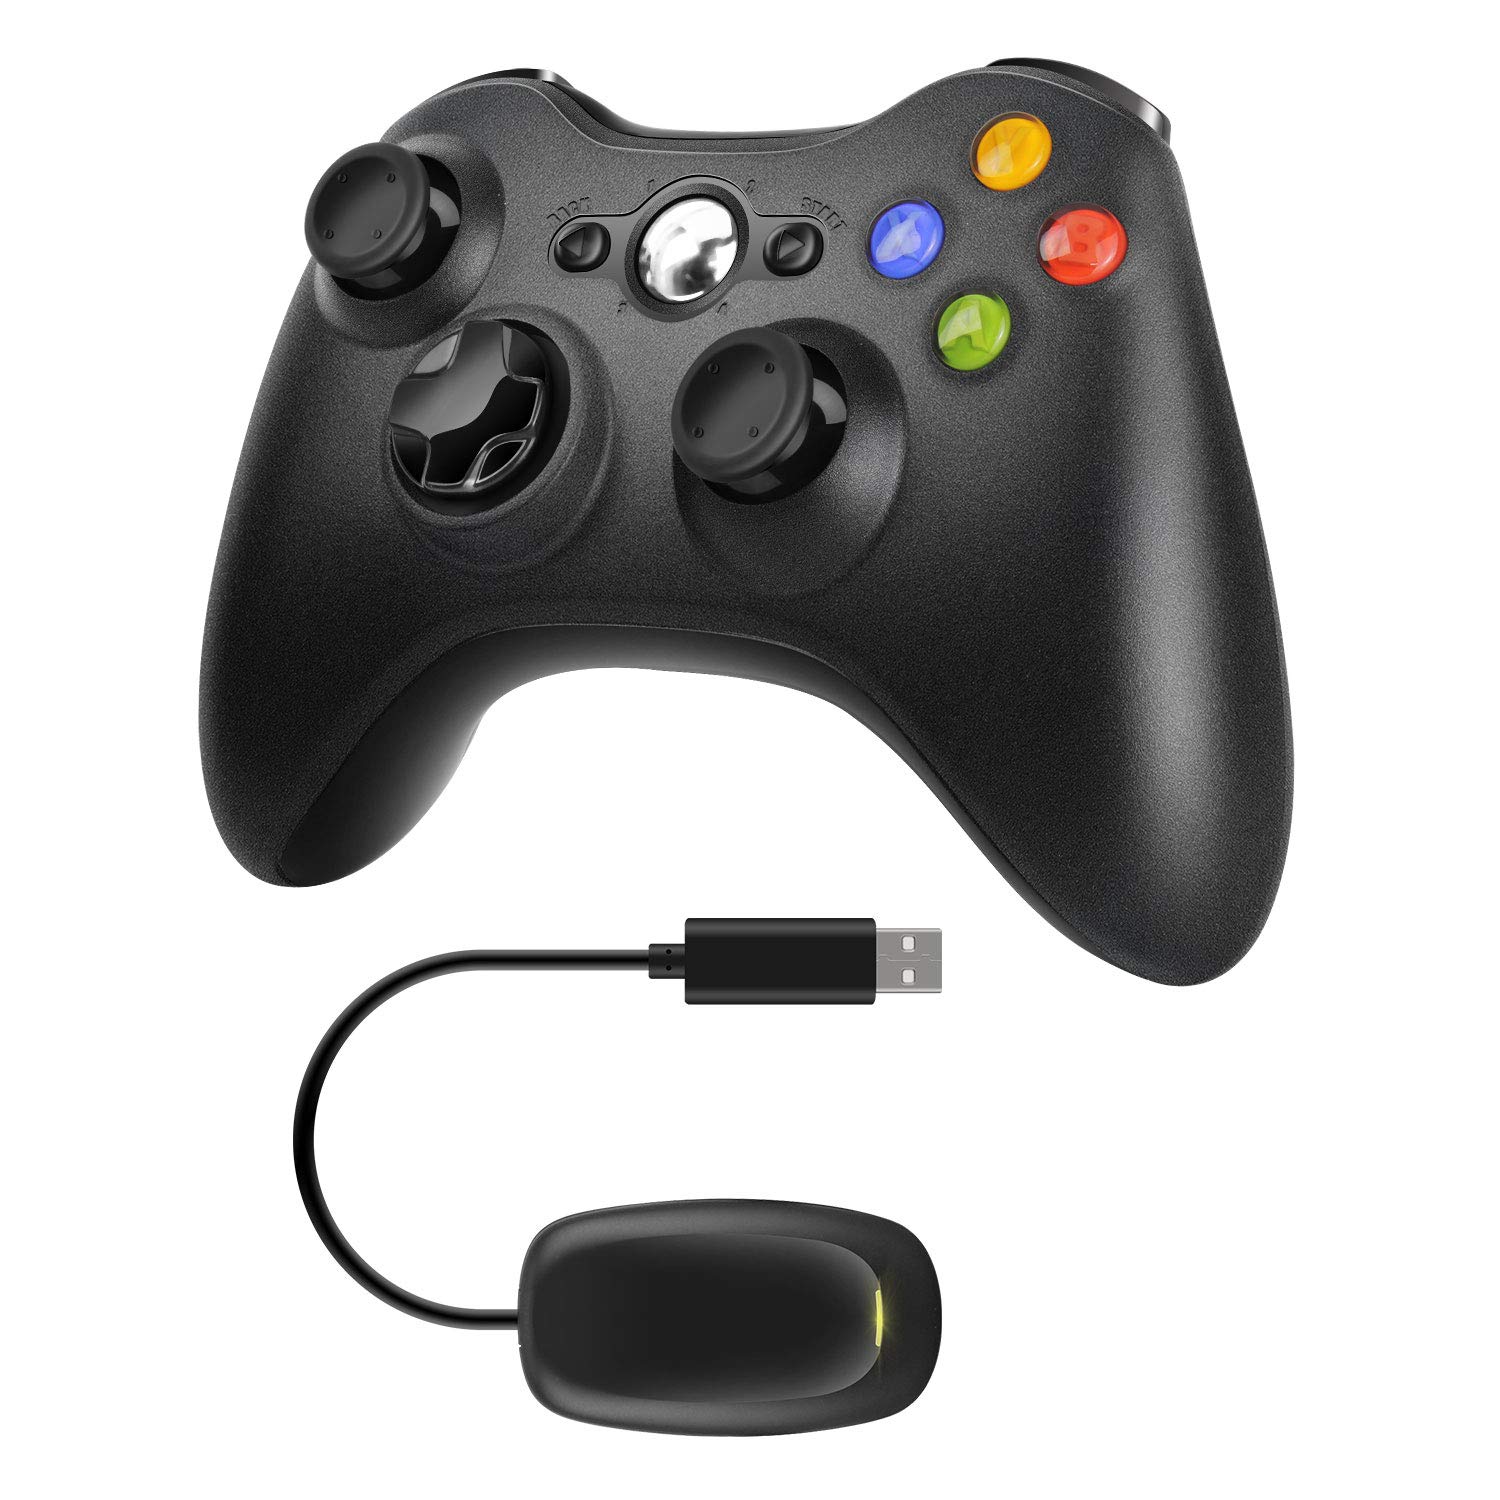 US$ 35.99 - Xbox 360 Wireless Controller 2.4GHZ Gamepad with ReceiverCORN  Dual Vibration Enhanced Game Controller for for Microsoft Xbox & Slim 360 PC  Windows 7,8,10 & PS3 - m.cornbuy.com